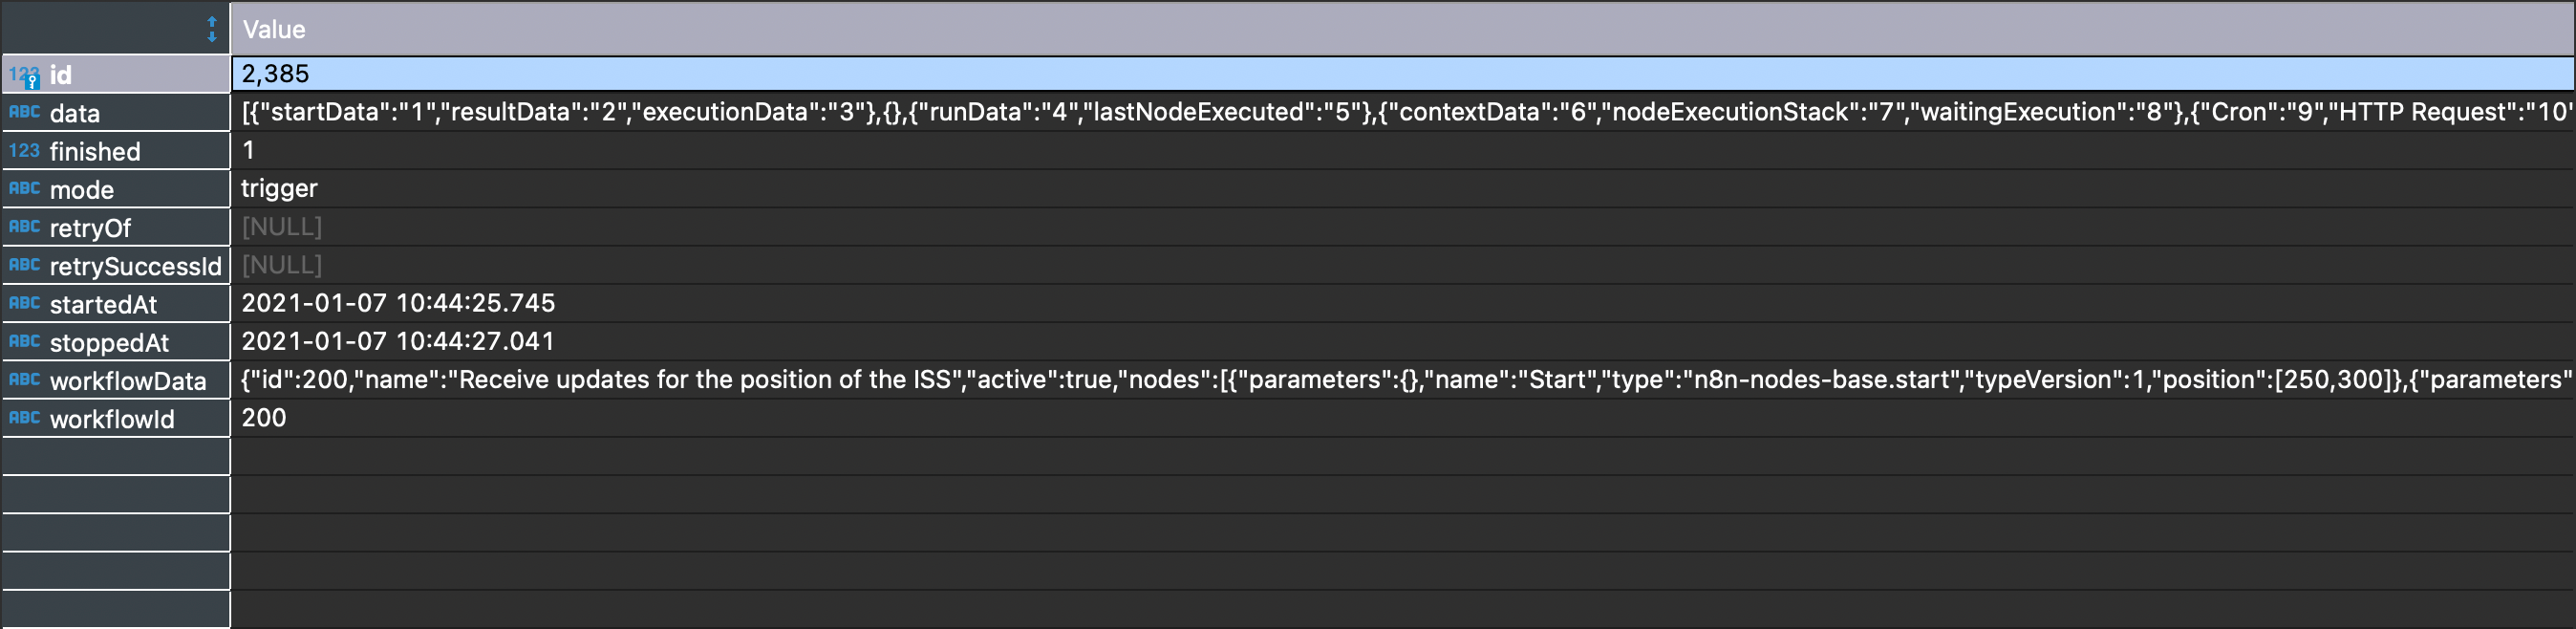 Data stored in the execution_entity table